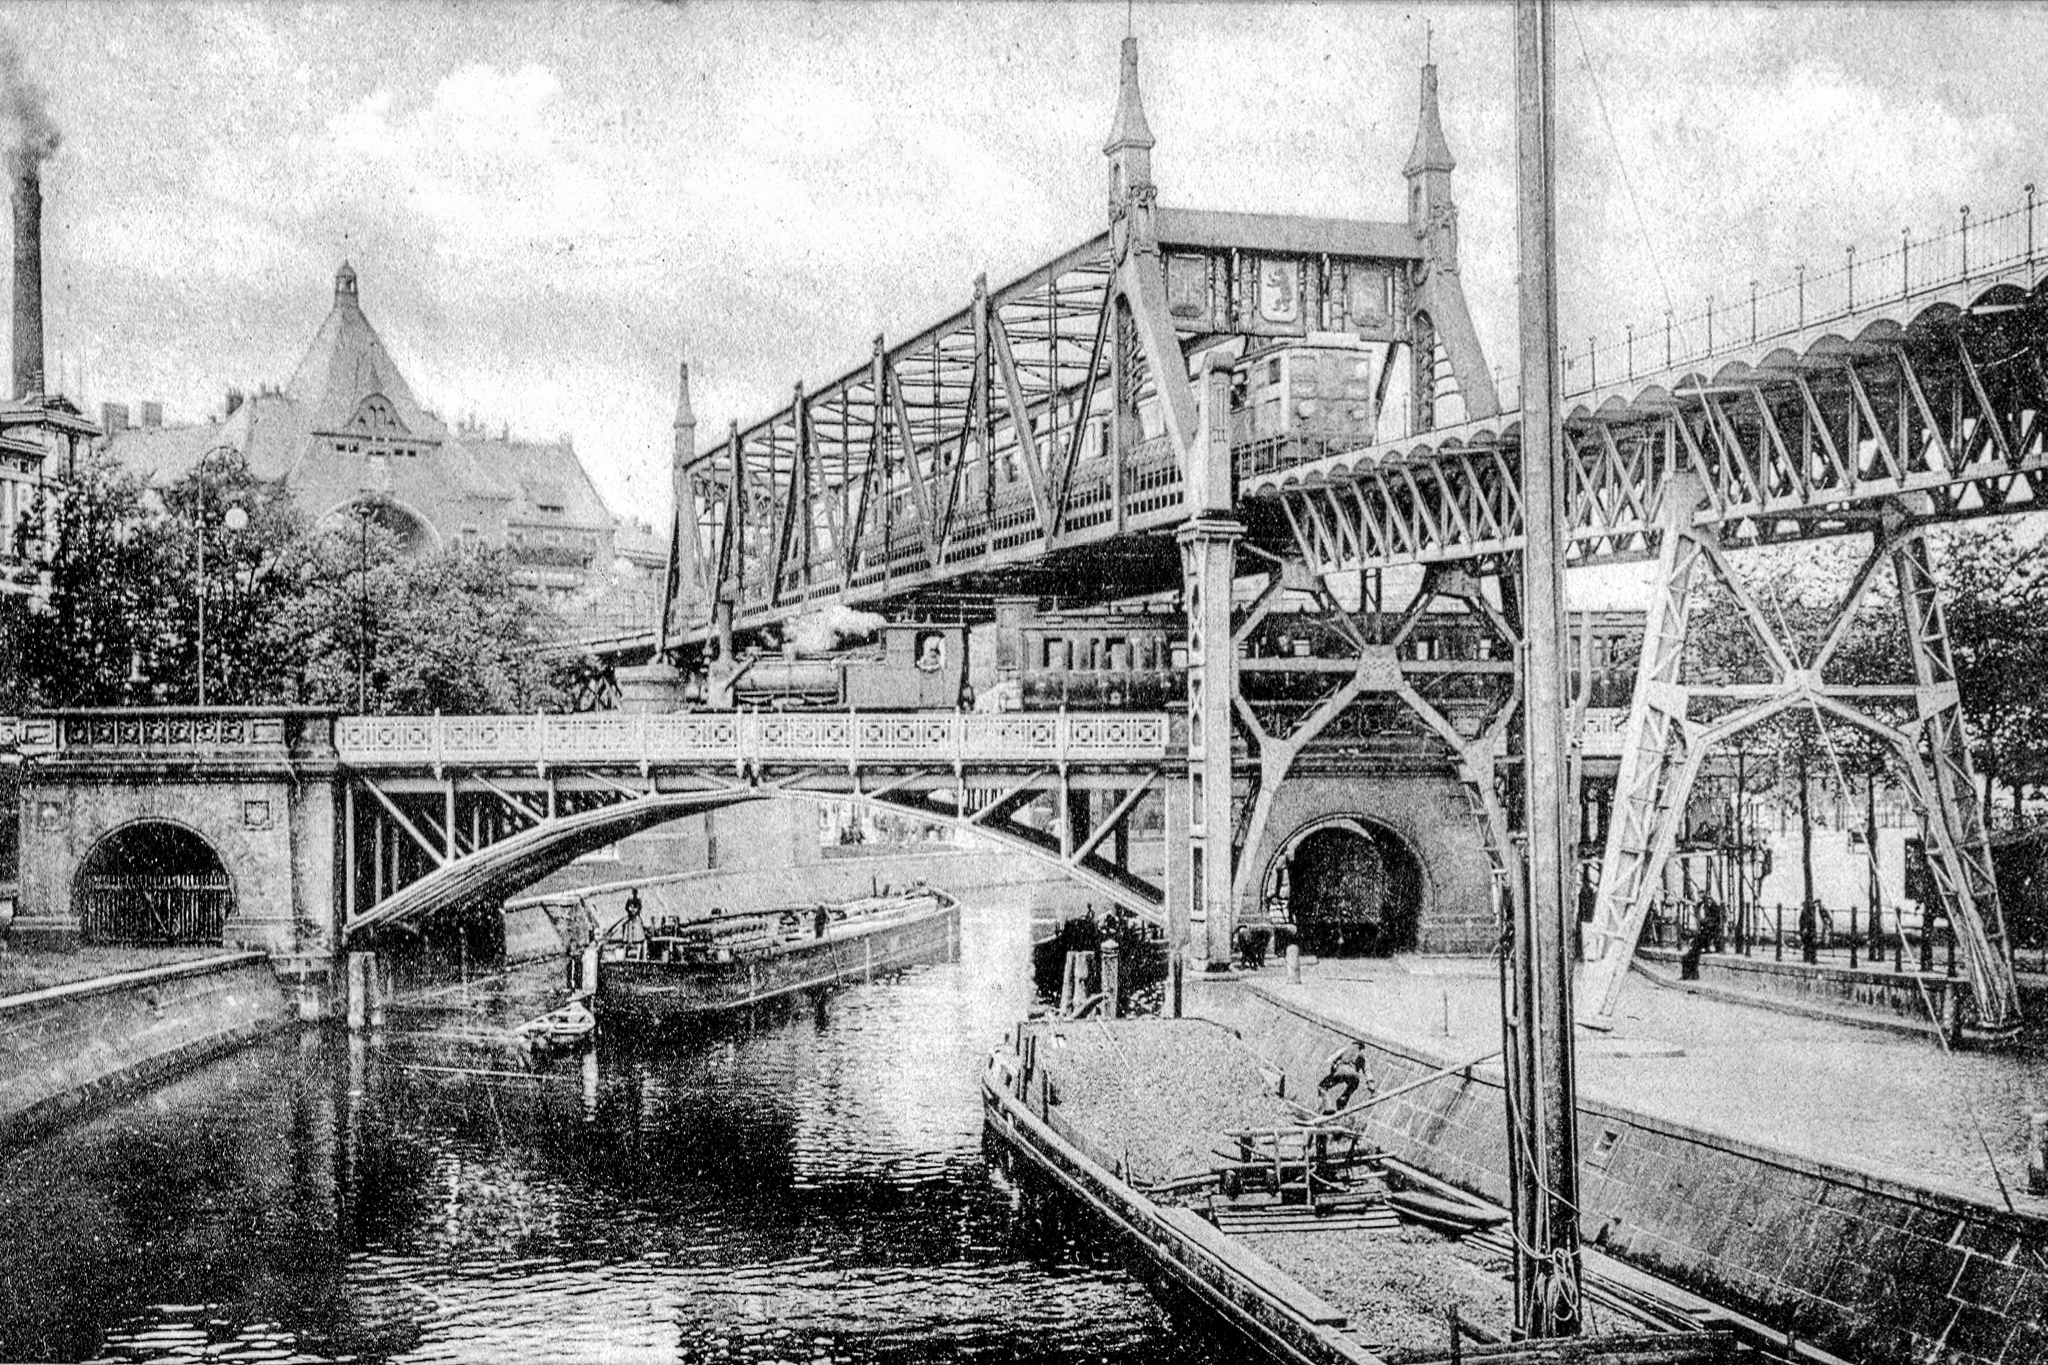 c.1900 - Bridge over the Landwehr canal showing the line from the Anhalter main rail station